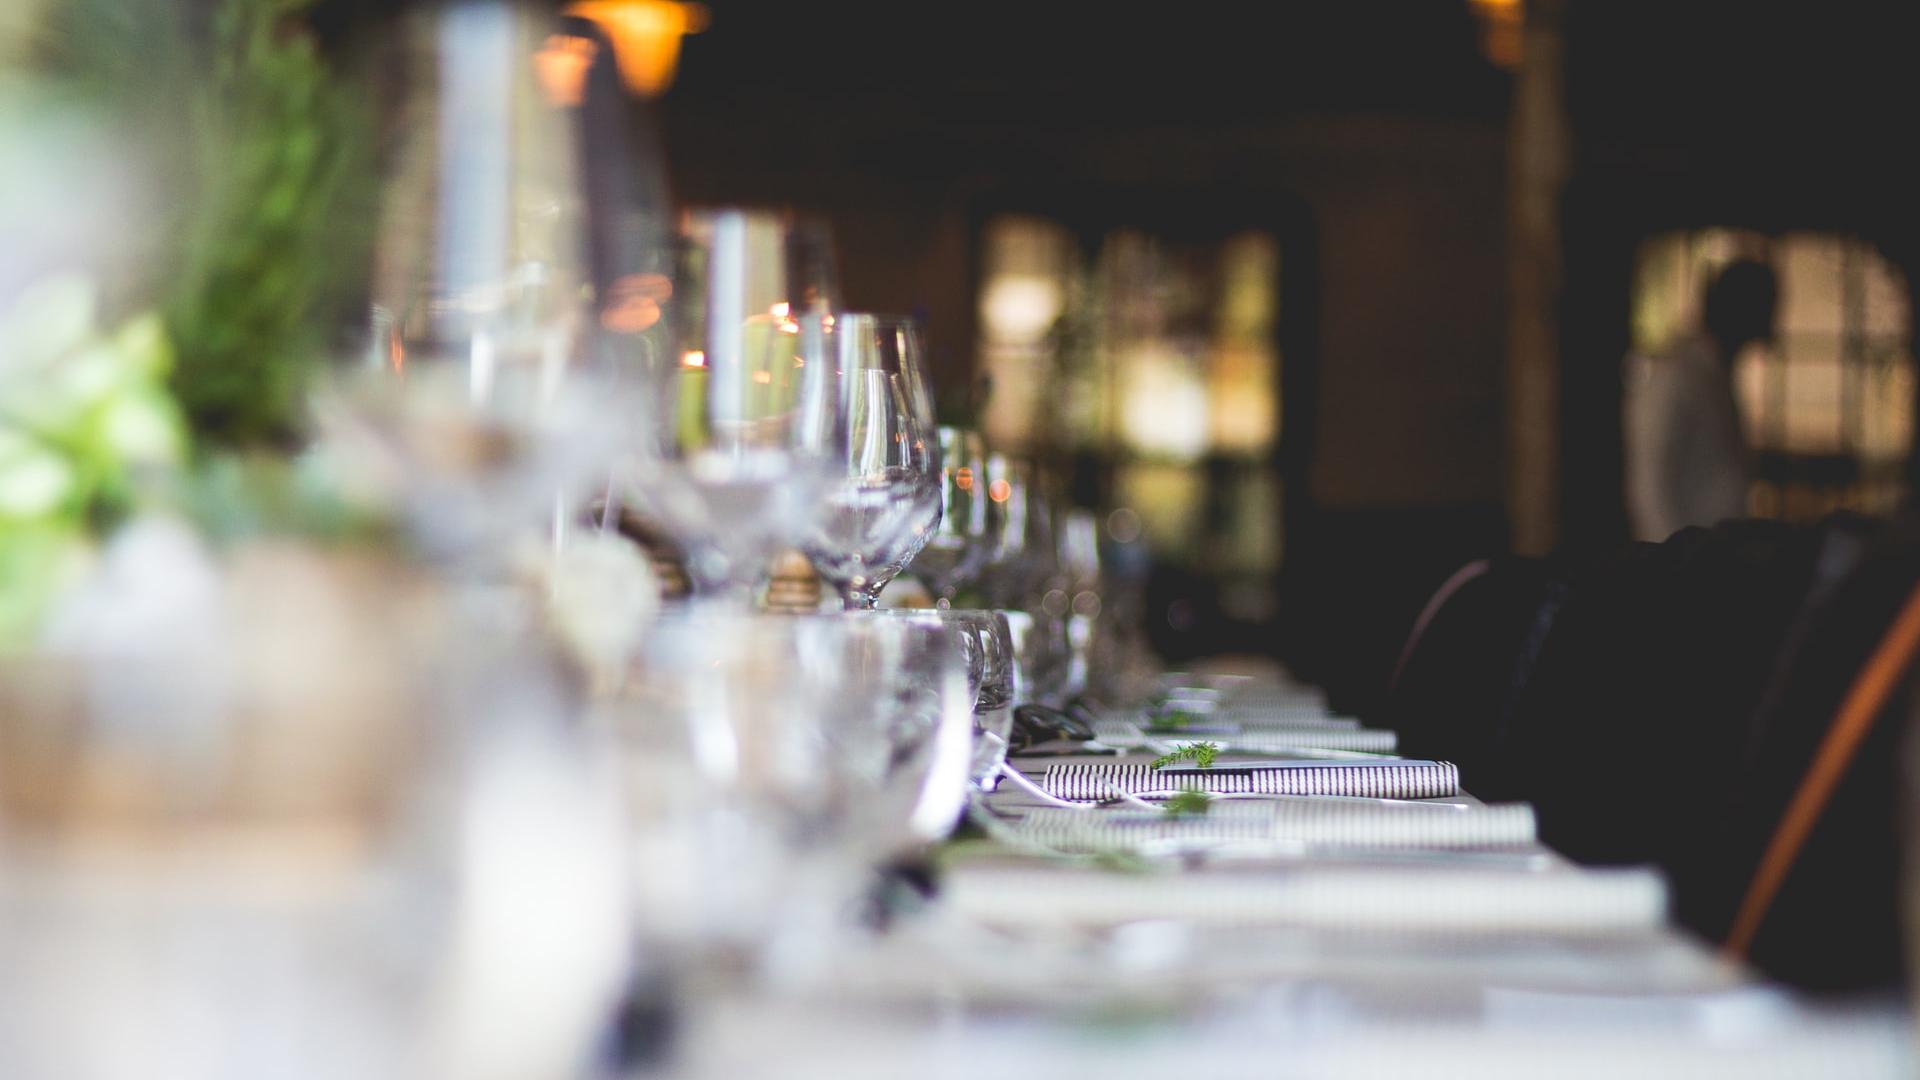 focused photo of wine glasses lined on table